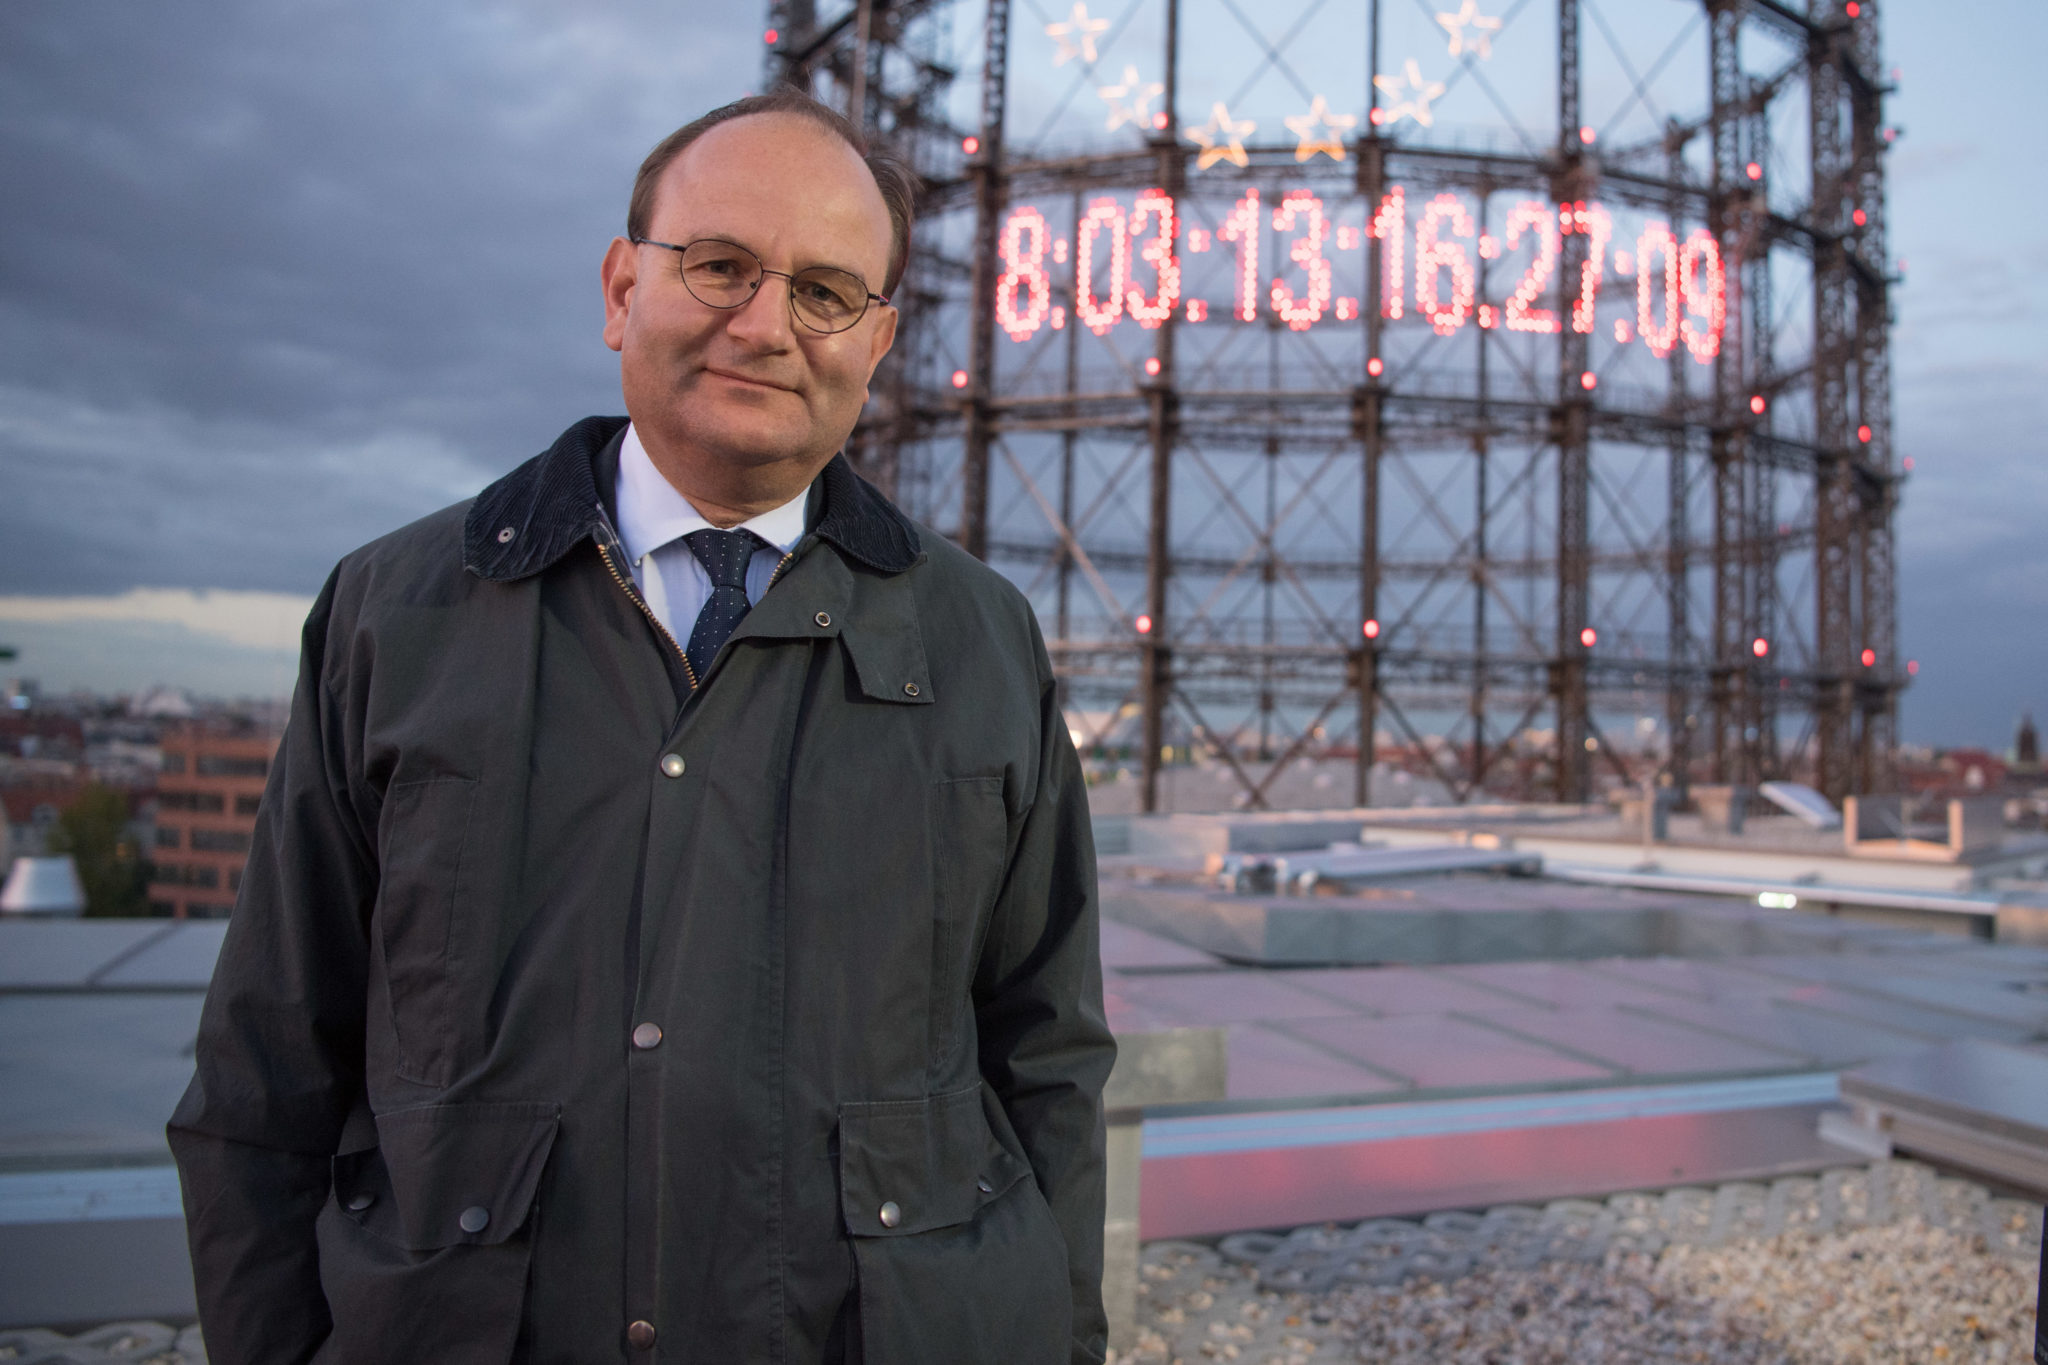 Climate researcher Professor Ottmar Edenhofer stands in front of a CO2 clock attached to a gasometer REthink Energy